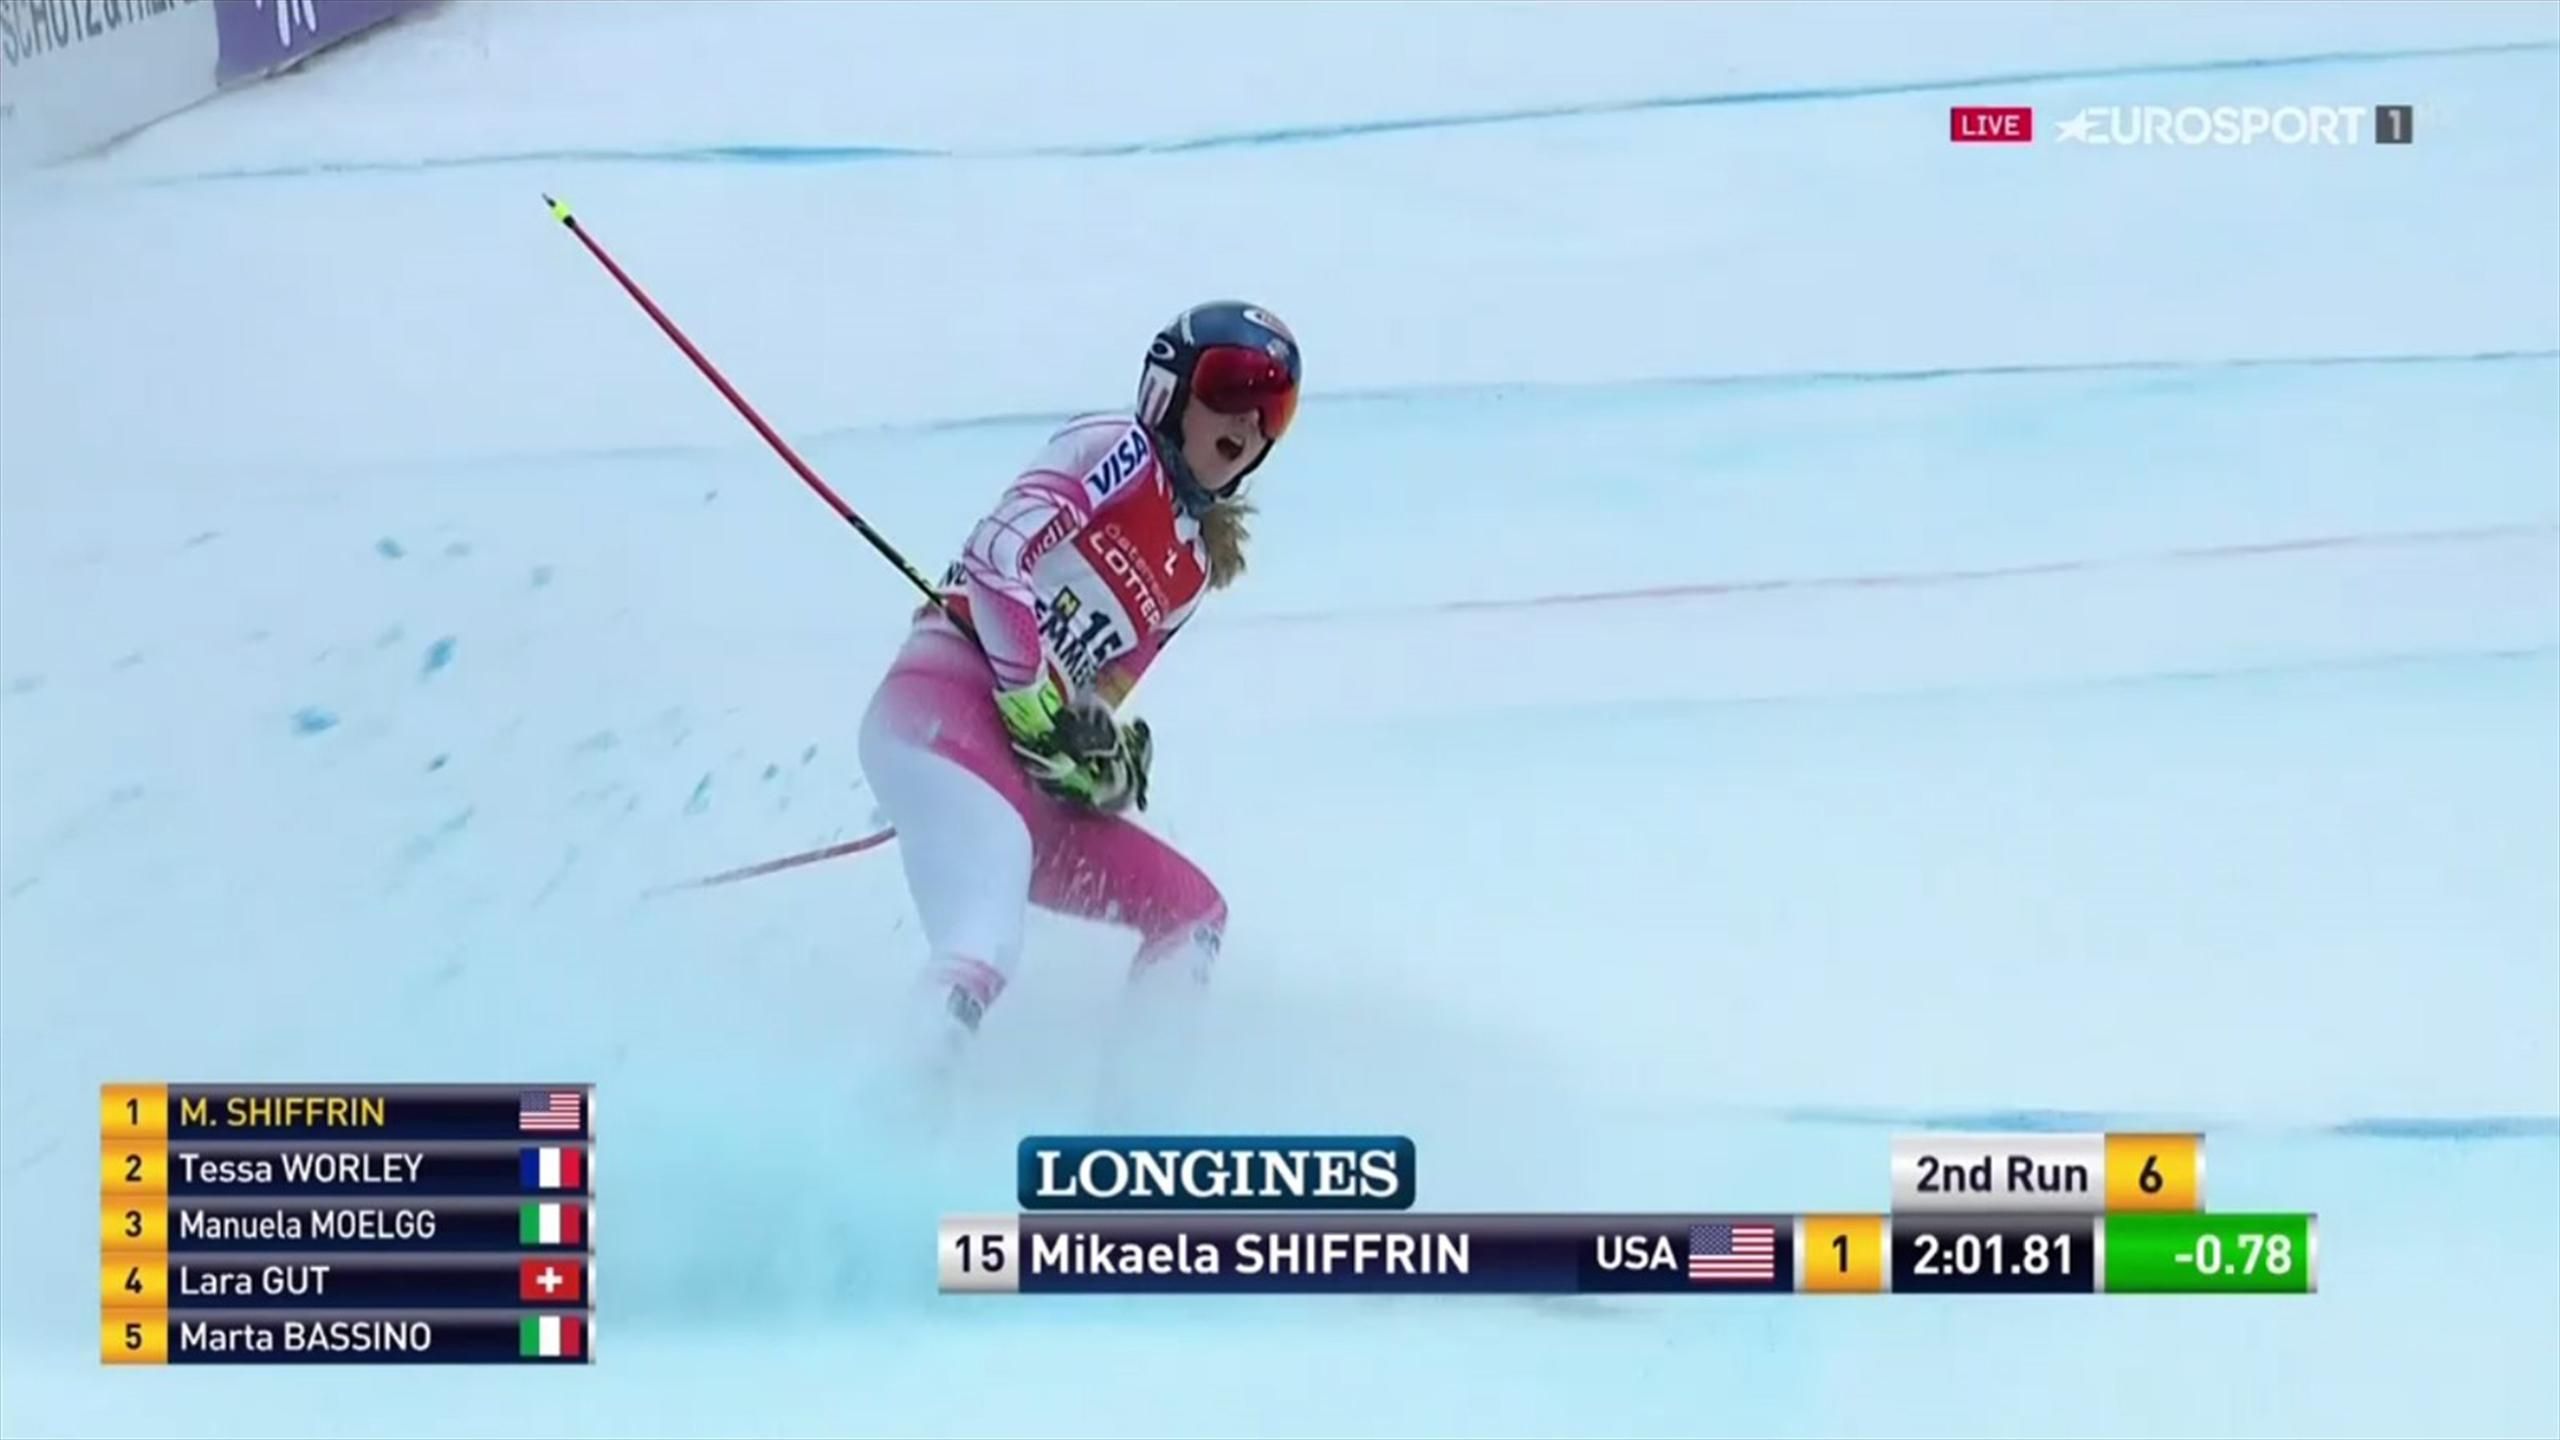 Mikaela Shiffrin wins Semmering Giant Slalom to top overall standings